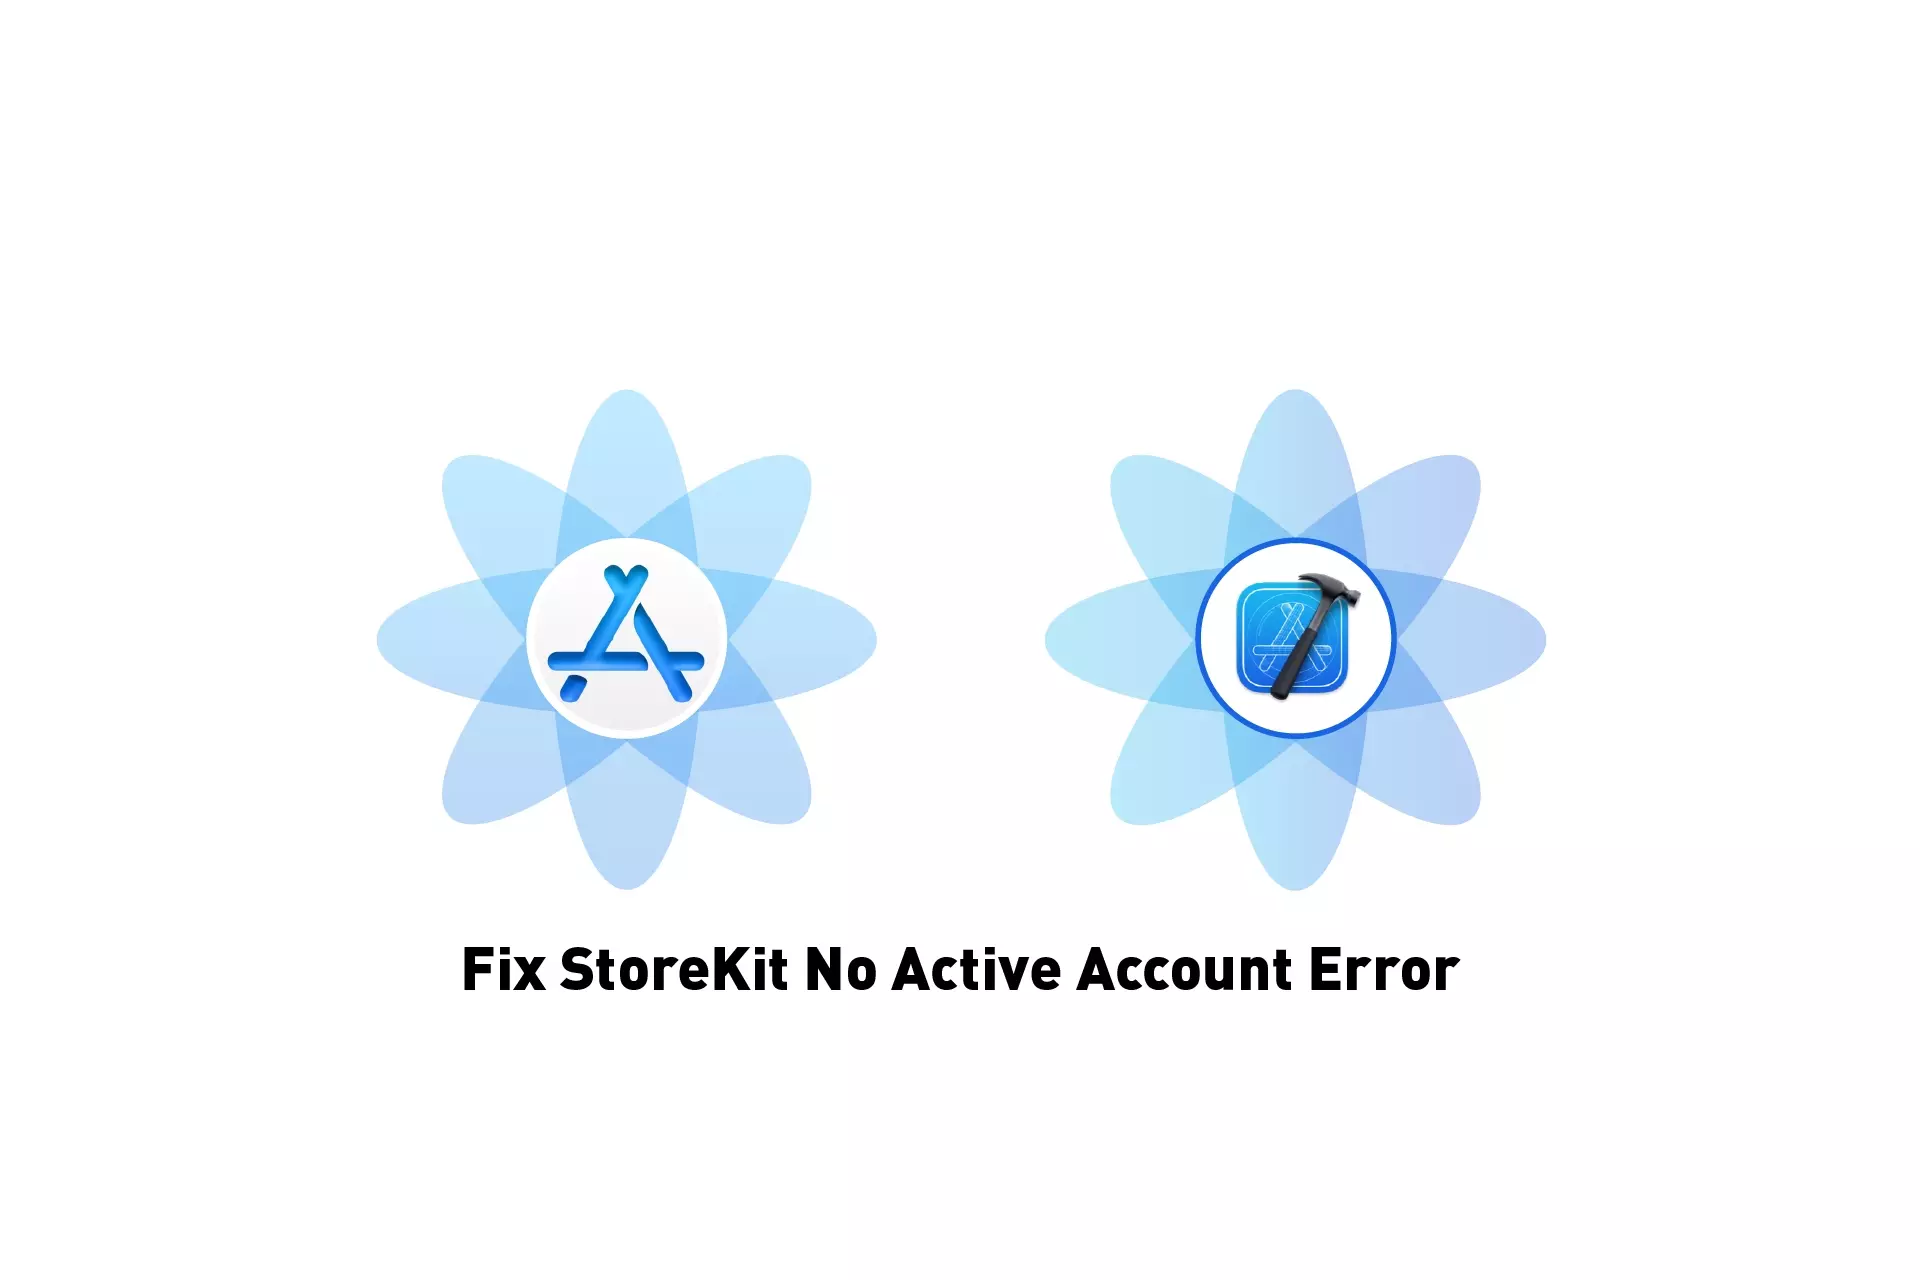 Two flowers that represent StoreKit and XCode side by side. Beneath them sits the text "Fix StoreKit No Active Account Error."